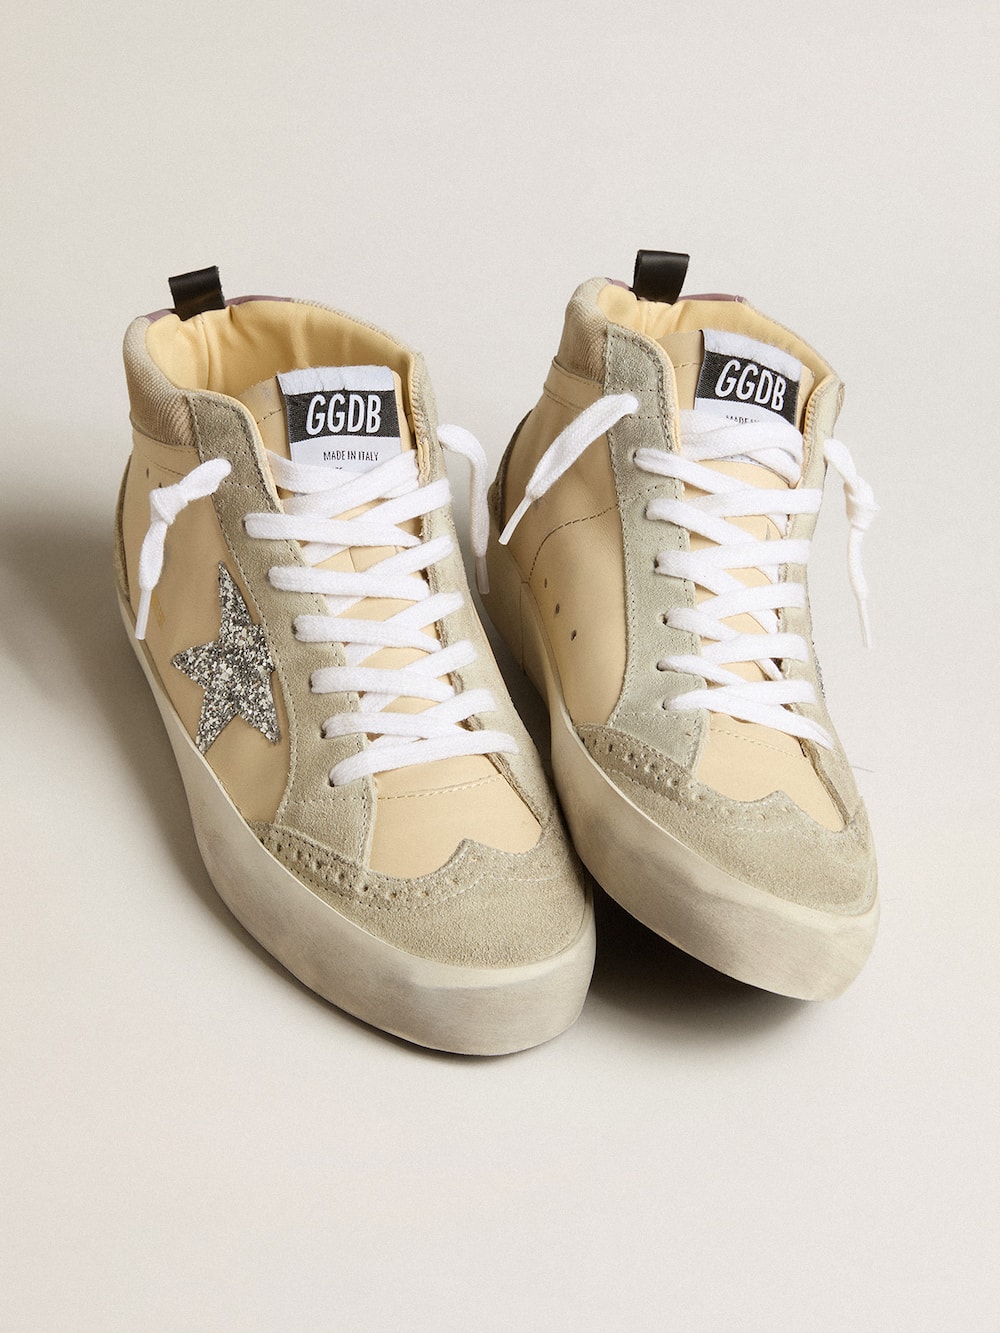 Golden Goose - Mid Star LTD in leather and corduroy with silver glitter star in 